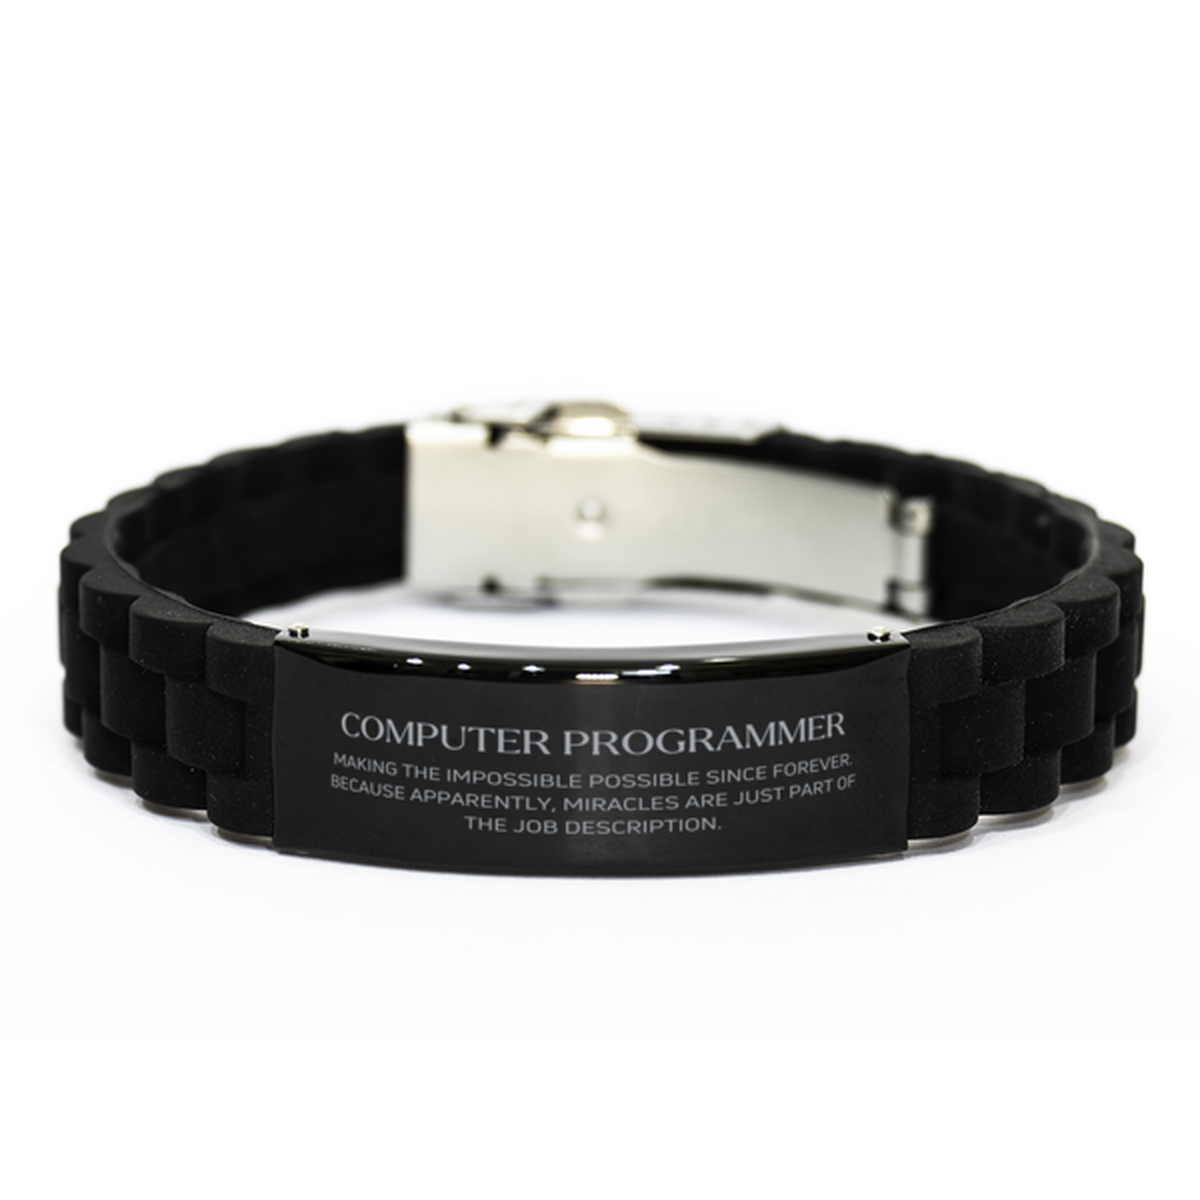 Funny Computer Programmer Gifts, Miracles are just part of the job description, Inspirational Birthday Black Glidelock Clasp Bracelet For Computer Programmer, Men, Women, Coworkers, Friends, Boss